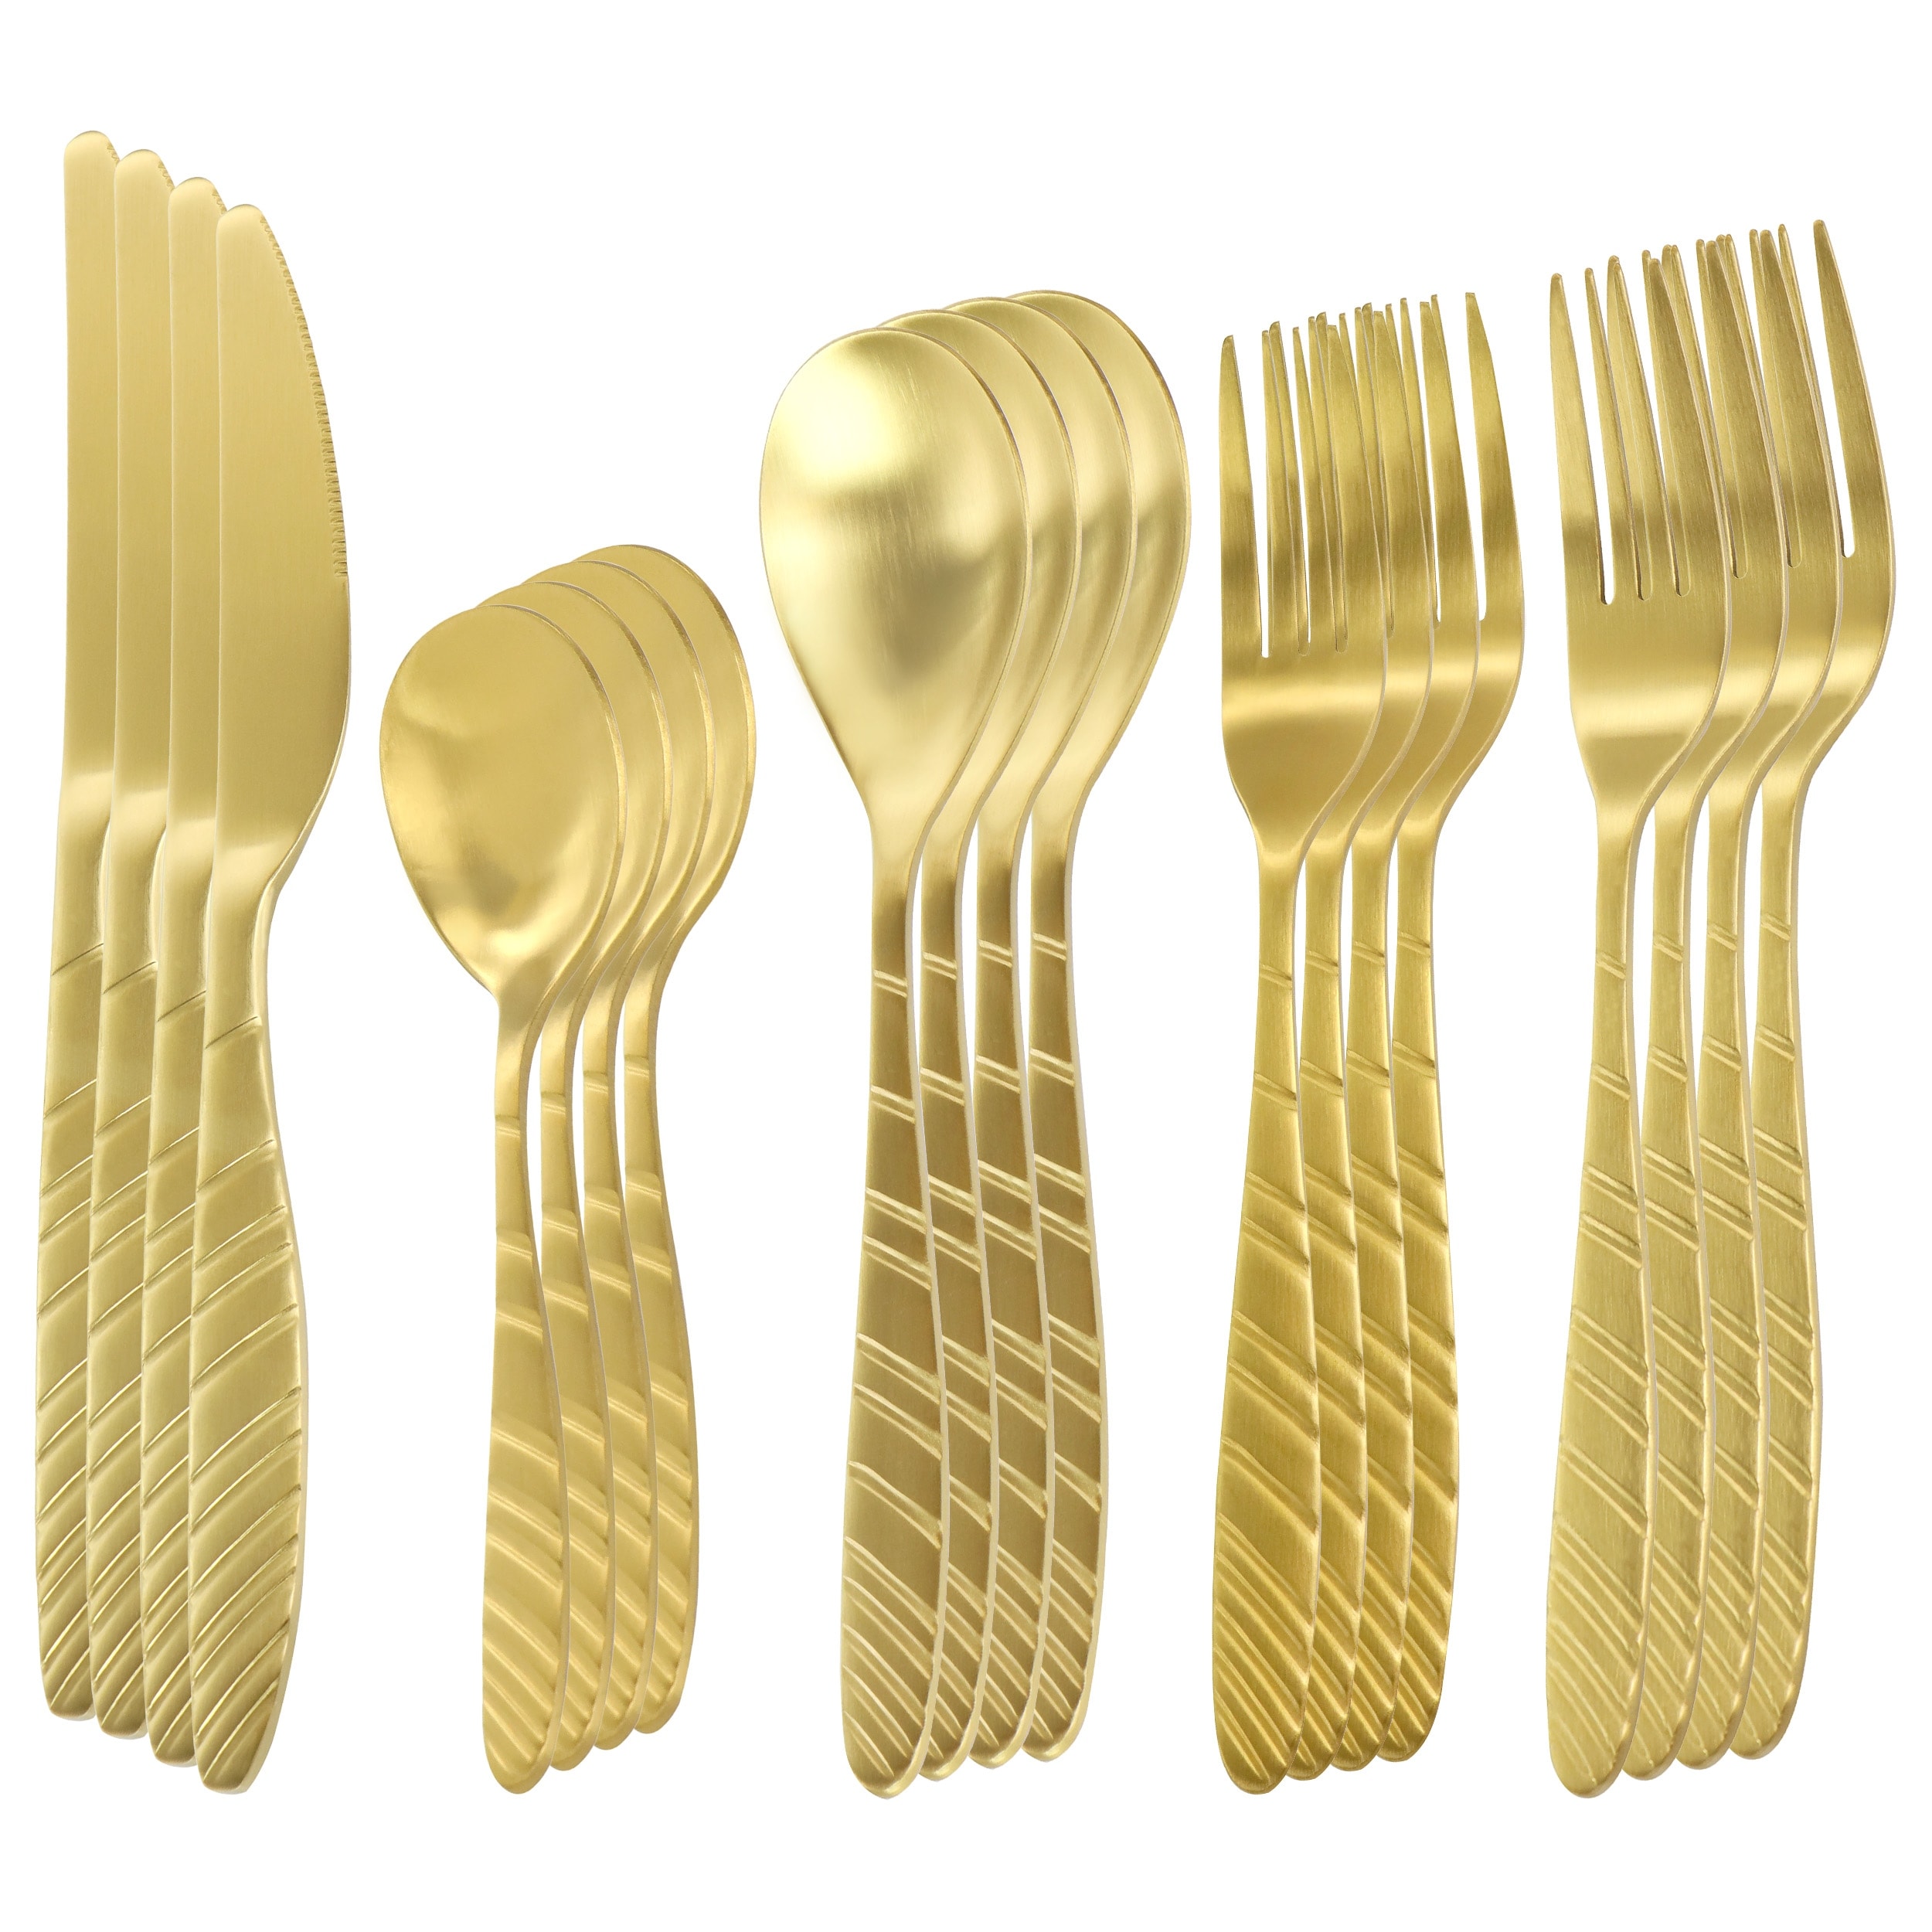 https://ak1.ostkcdn.com/images/products/is/images/direct/dc6a2970e3123a9af54a2bd97217e7e1d209b18f/Megachef-La-Vague-20pc-Flatware-Utensil-Set-Service-for-4-Matte-Gold.jpg